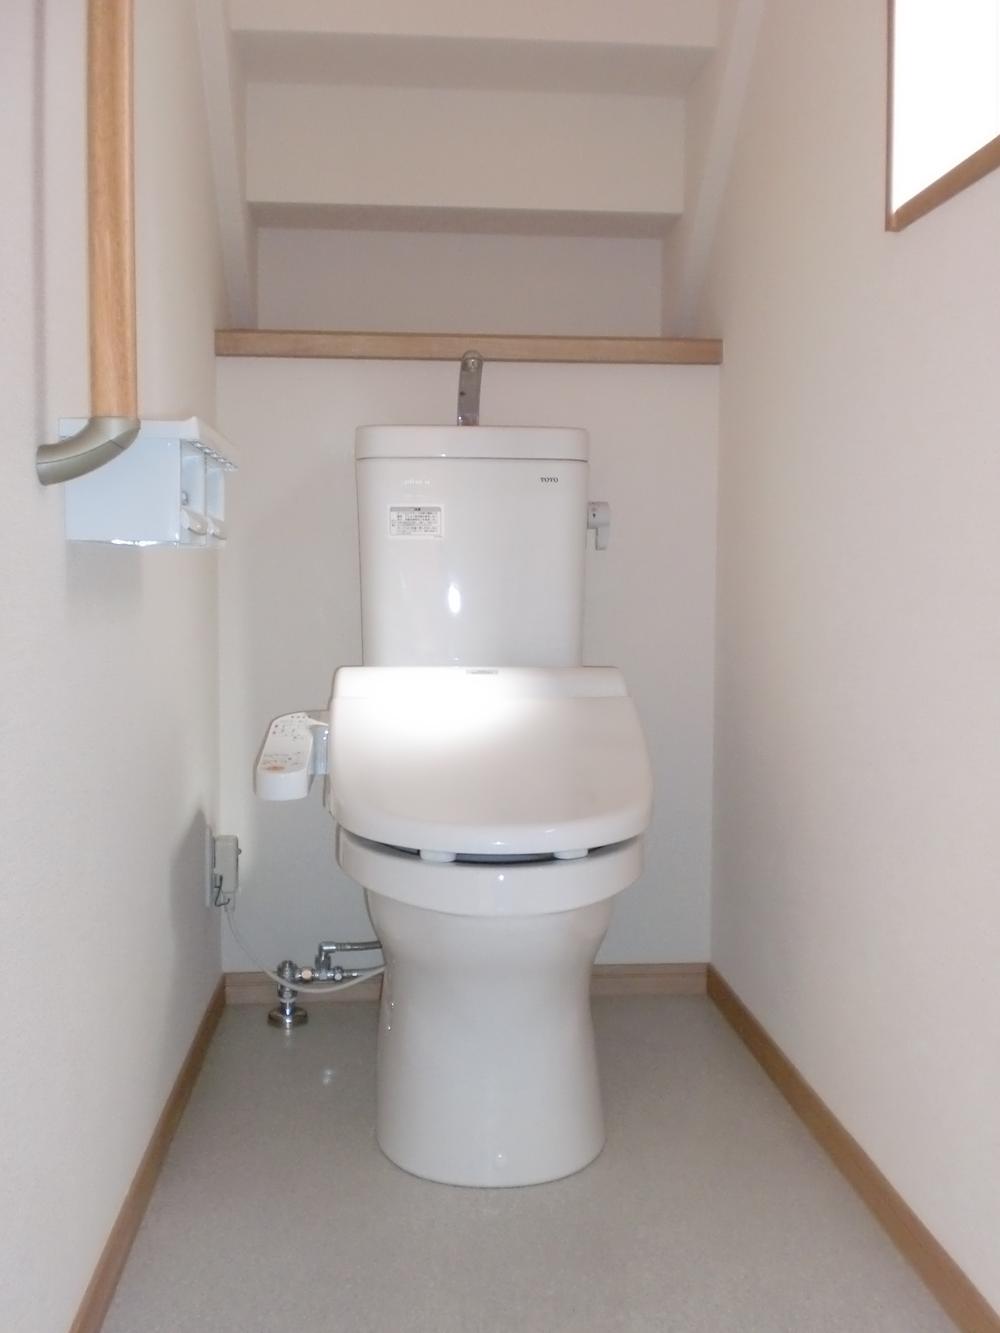 Toilet. It is the first floor of the multi-functional toilet.